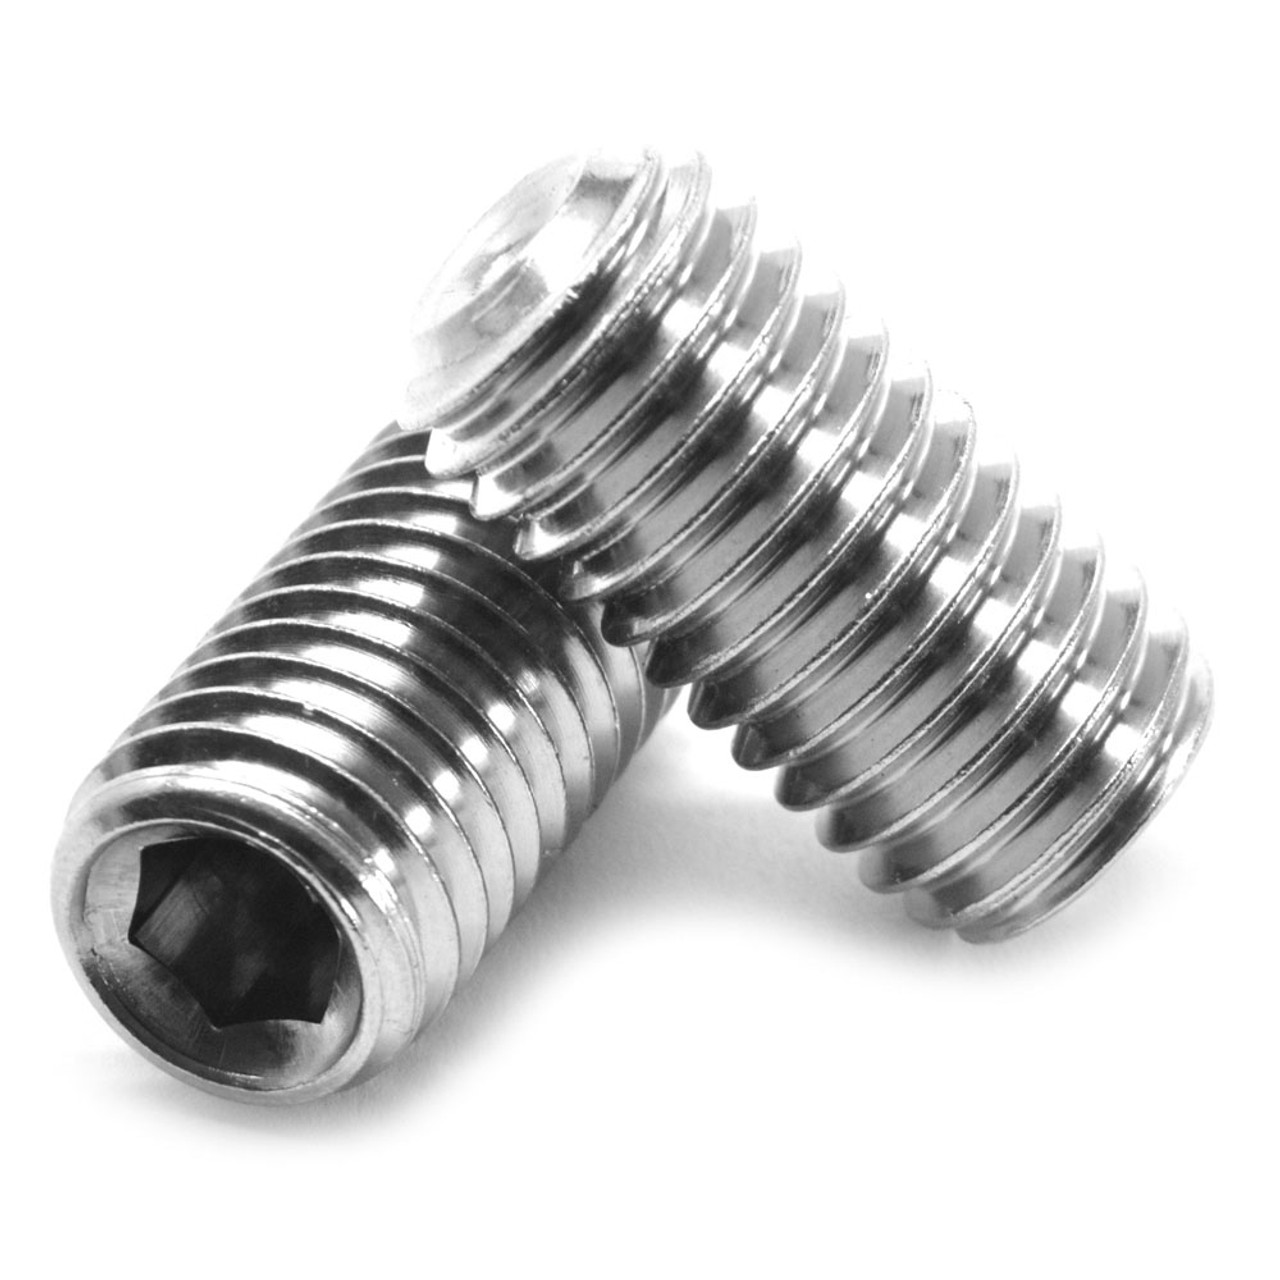 M2 x 0.40 x 8 MM Coarse Thread DIN 916 / ISO 4029 Socket Set Screw Cup Point Stainless Steel 316